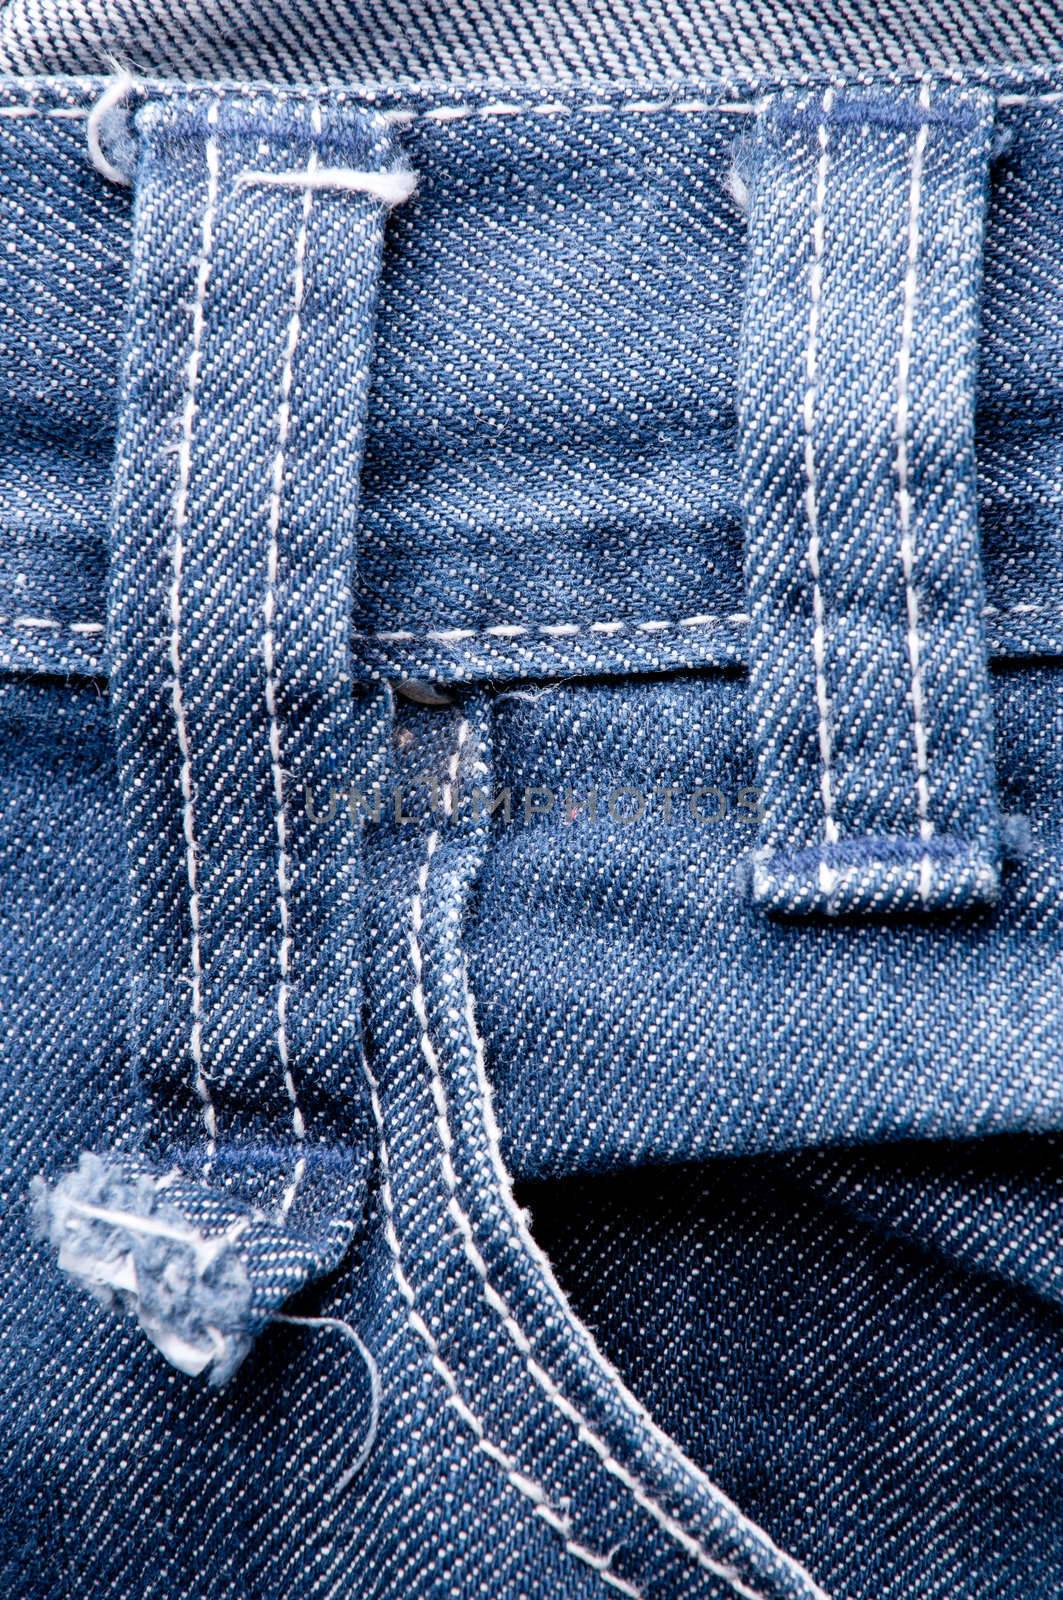 texture of fabric in denim with details